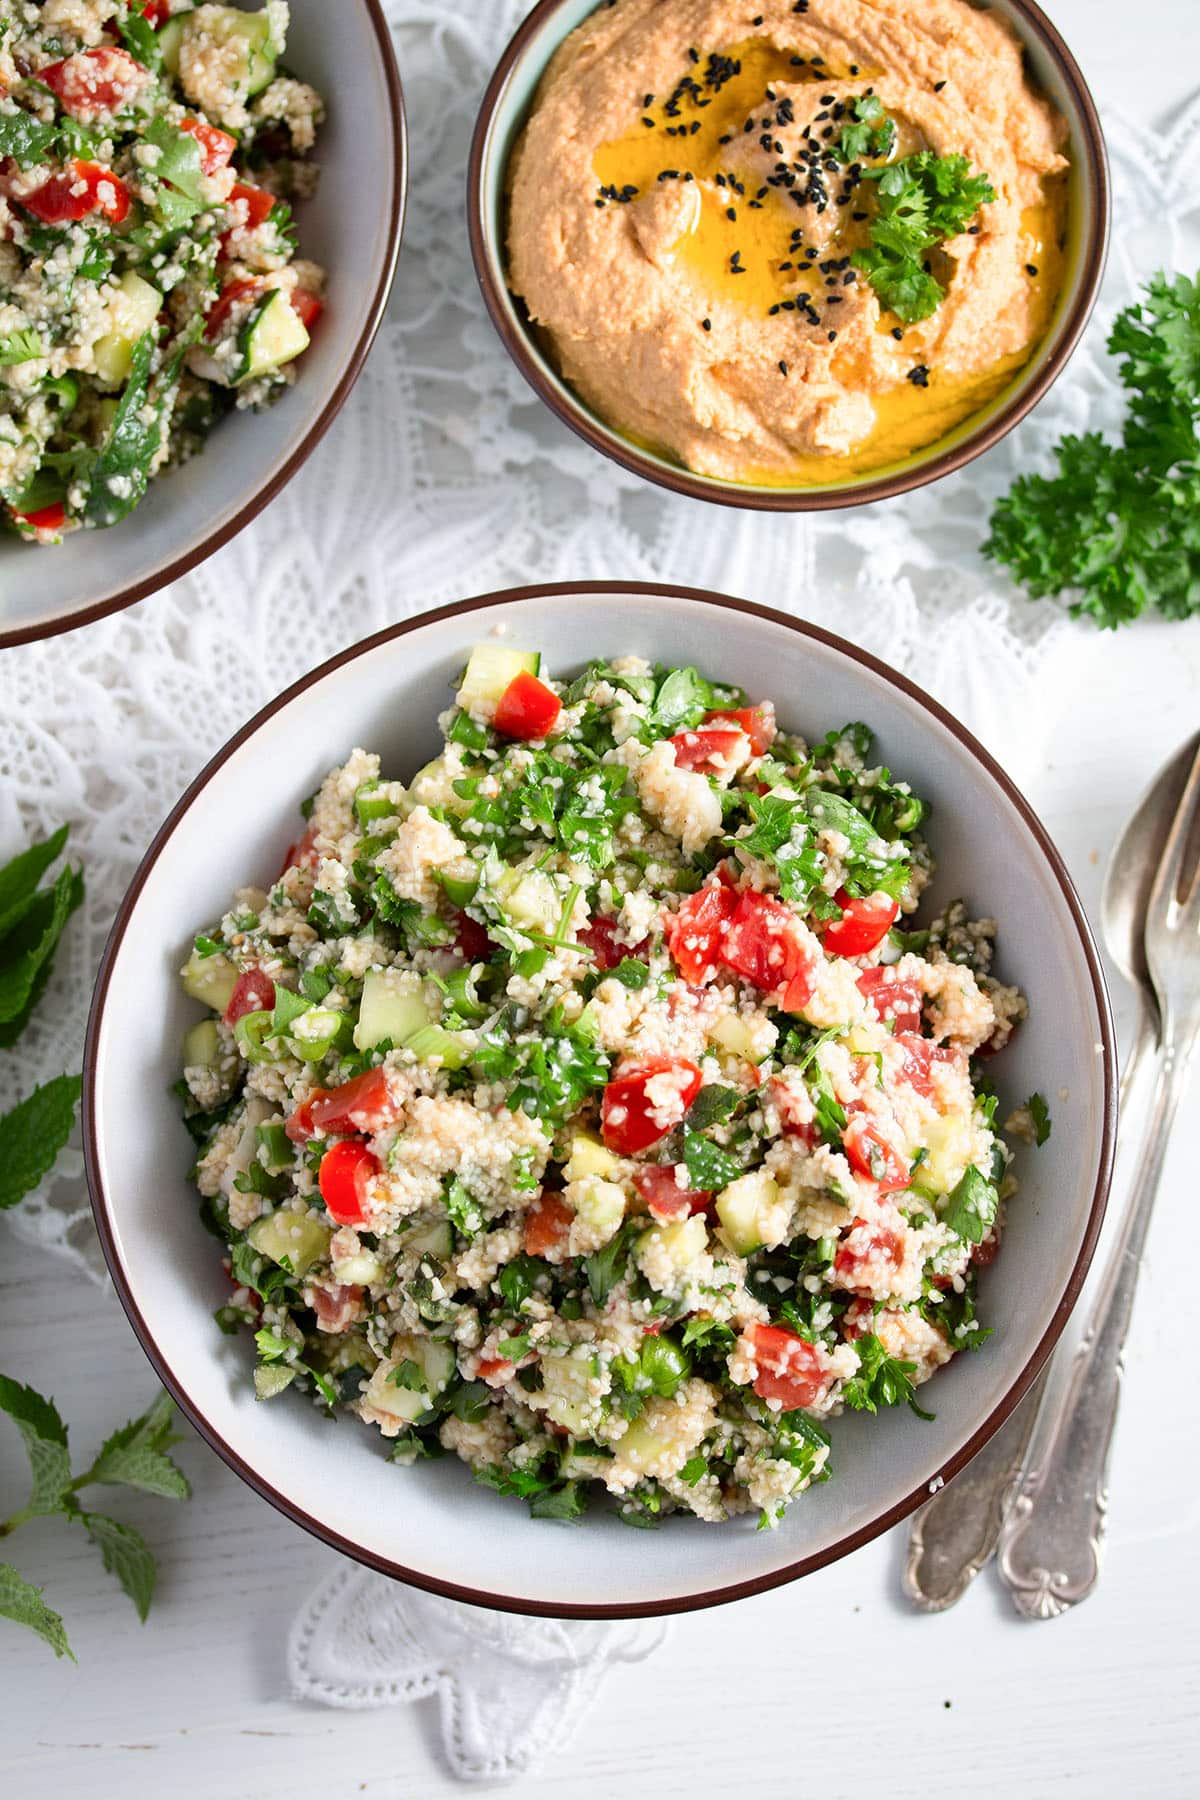 bowls with tabbouleh and hummus on the table.